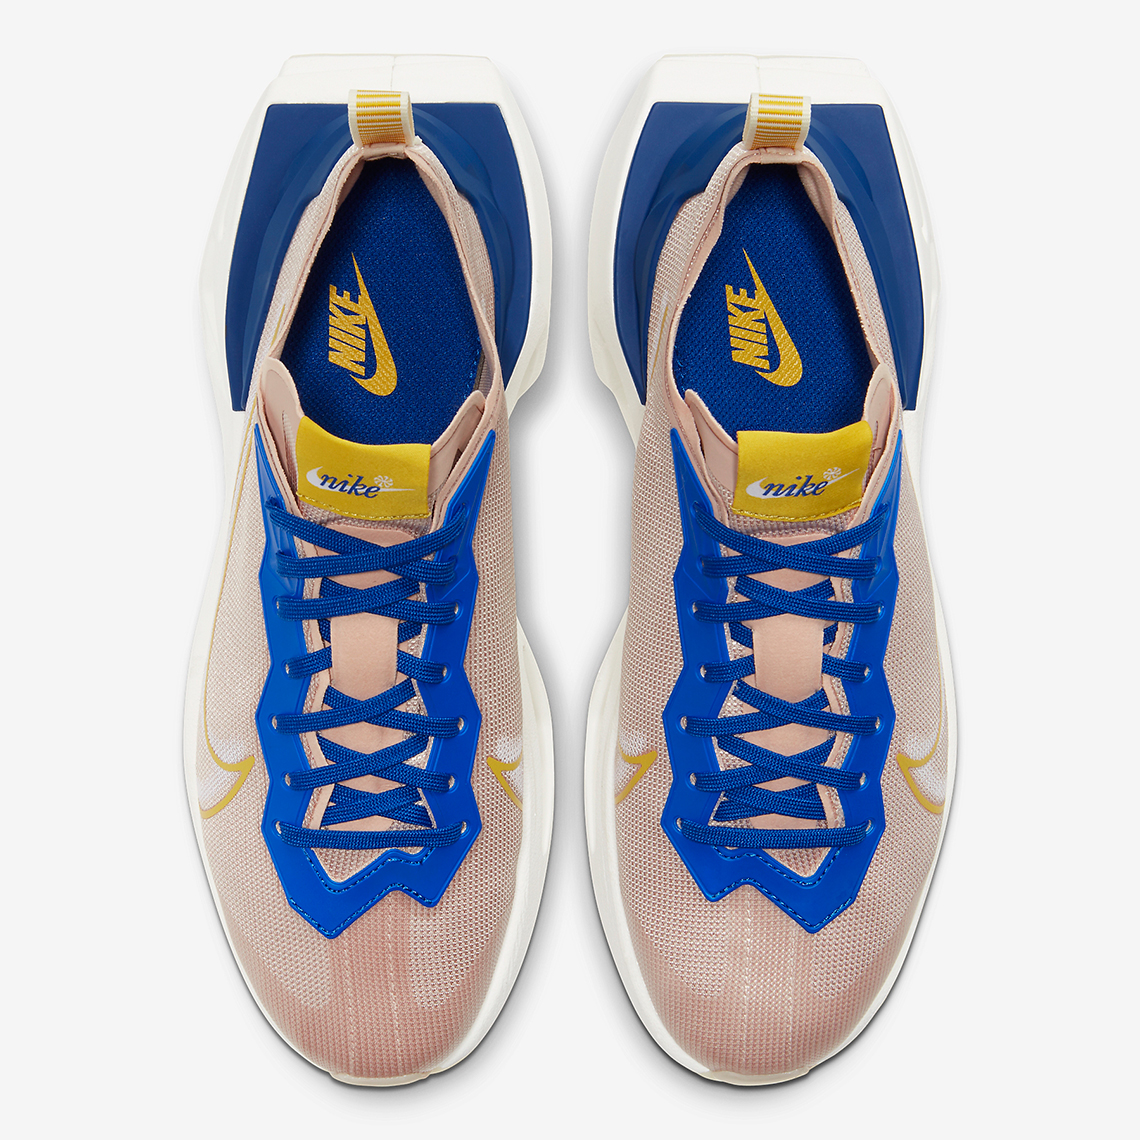 Nike ZoomX Vista Grind Tan Royal CT8919-200 Release Info 